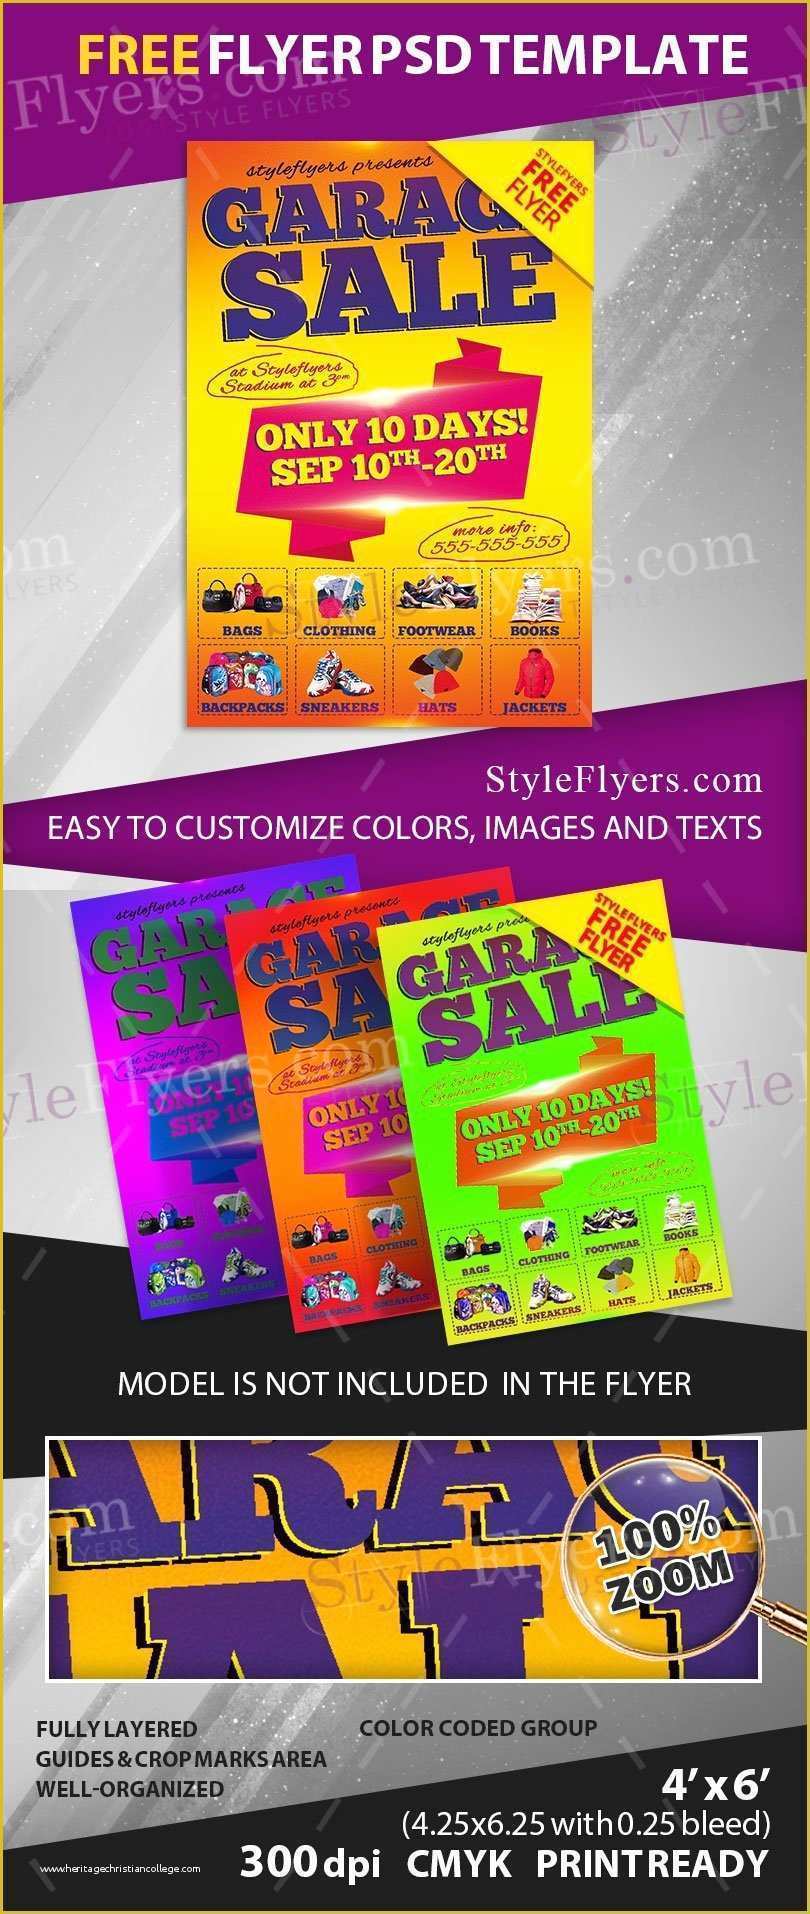 Free Psd Flyer Templates Of Garage Sale Free Psd Flyer Template Free Download